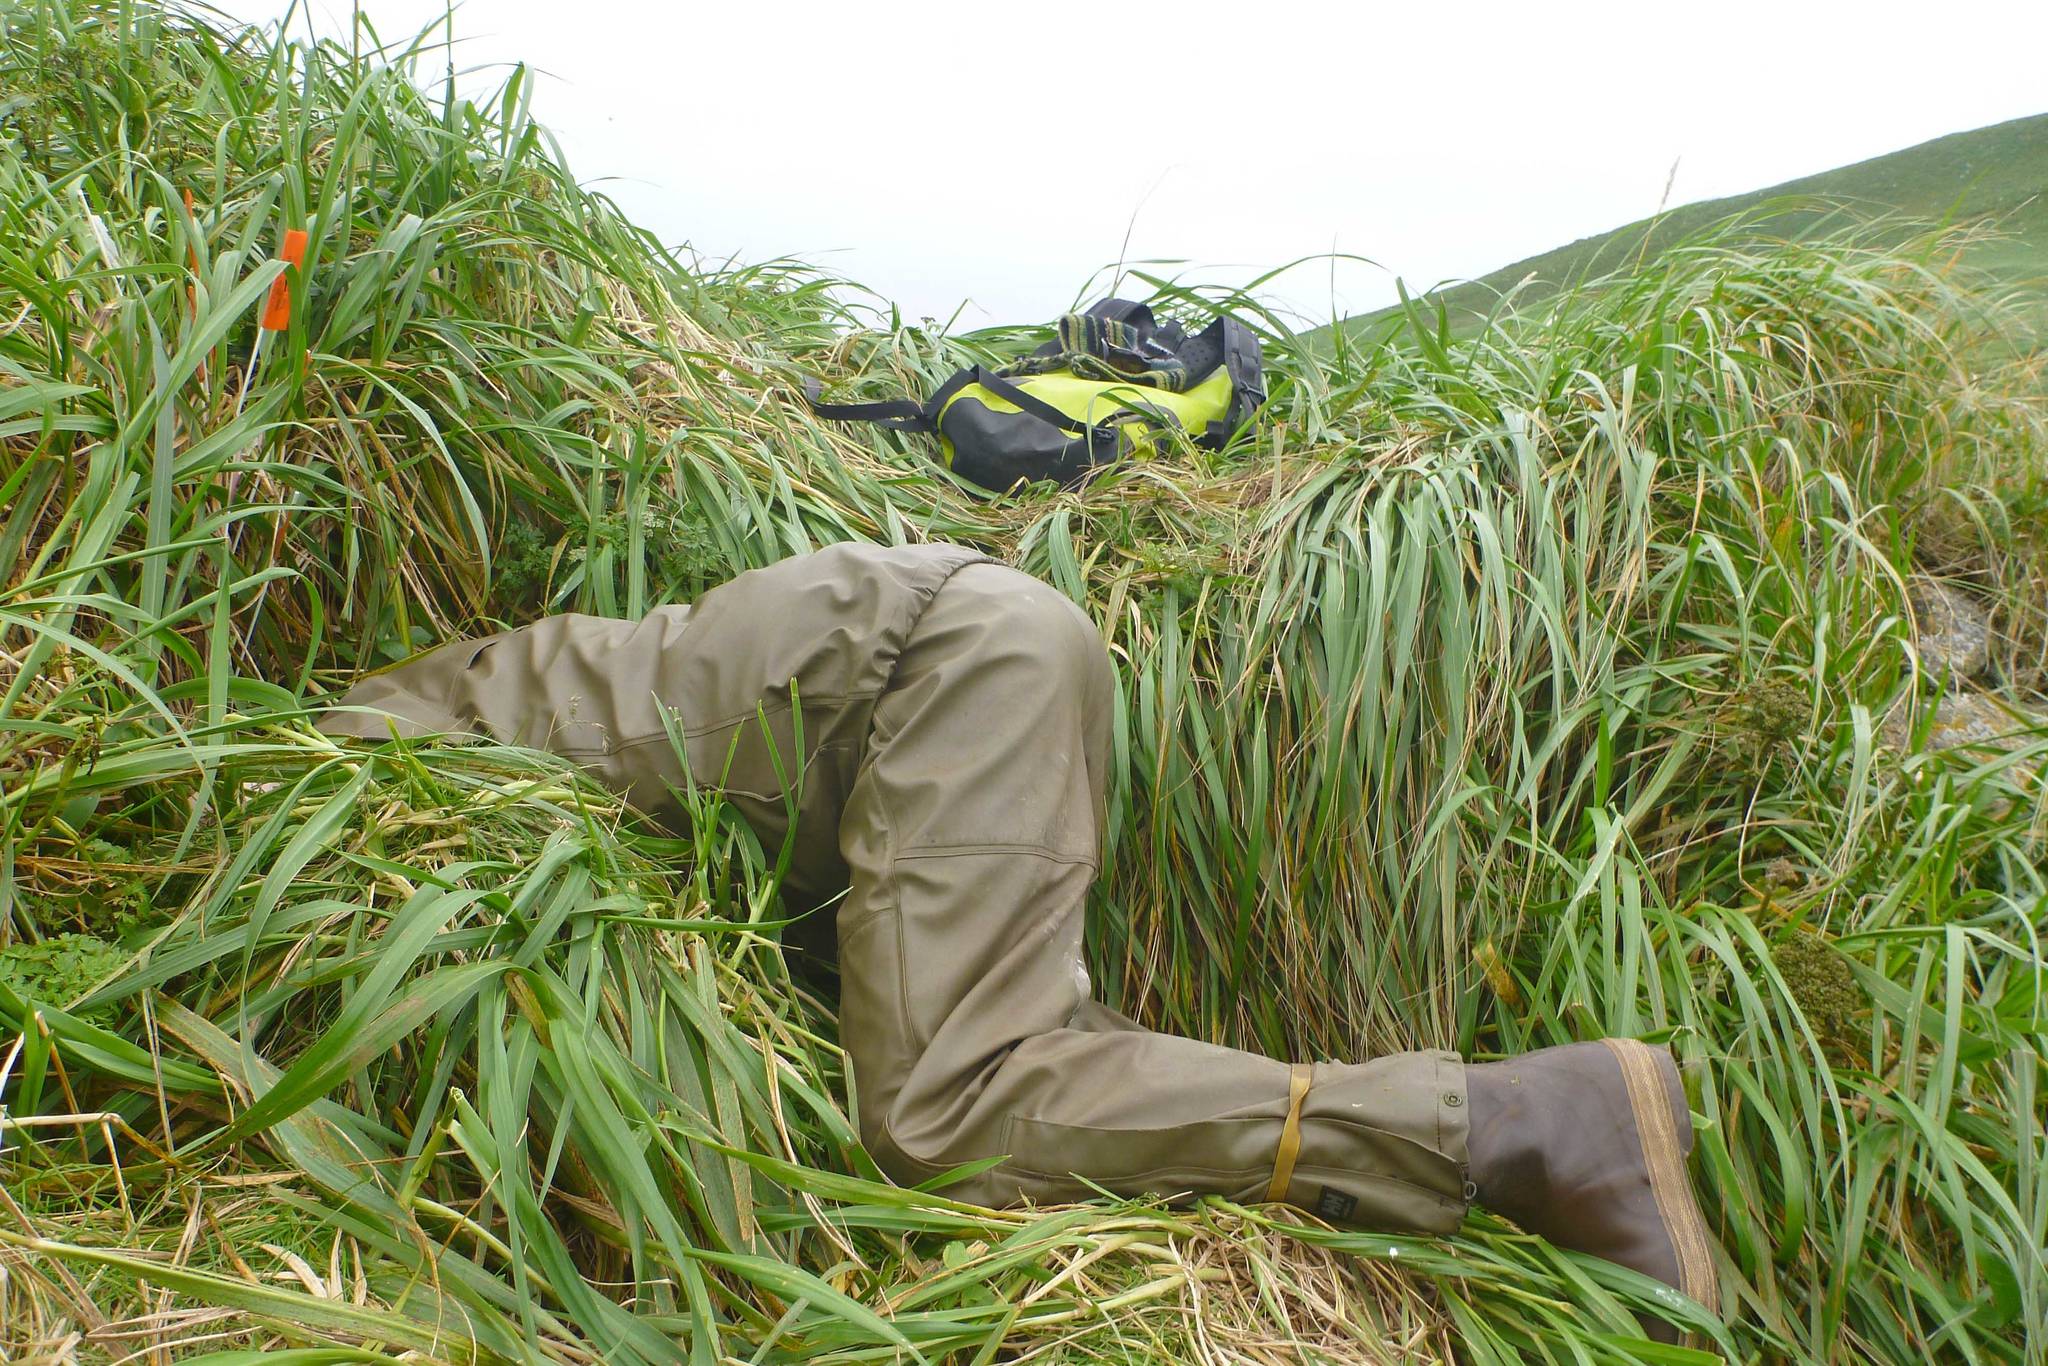 Biologist Daneil Rapp reaches way into a burrow to investigate its contents. (Photo by Sarah Youngren/USFWS)